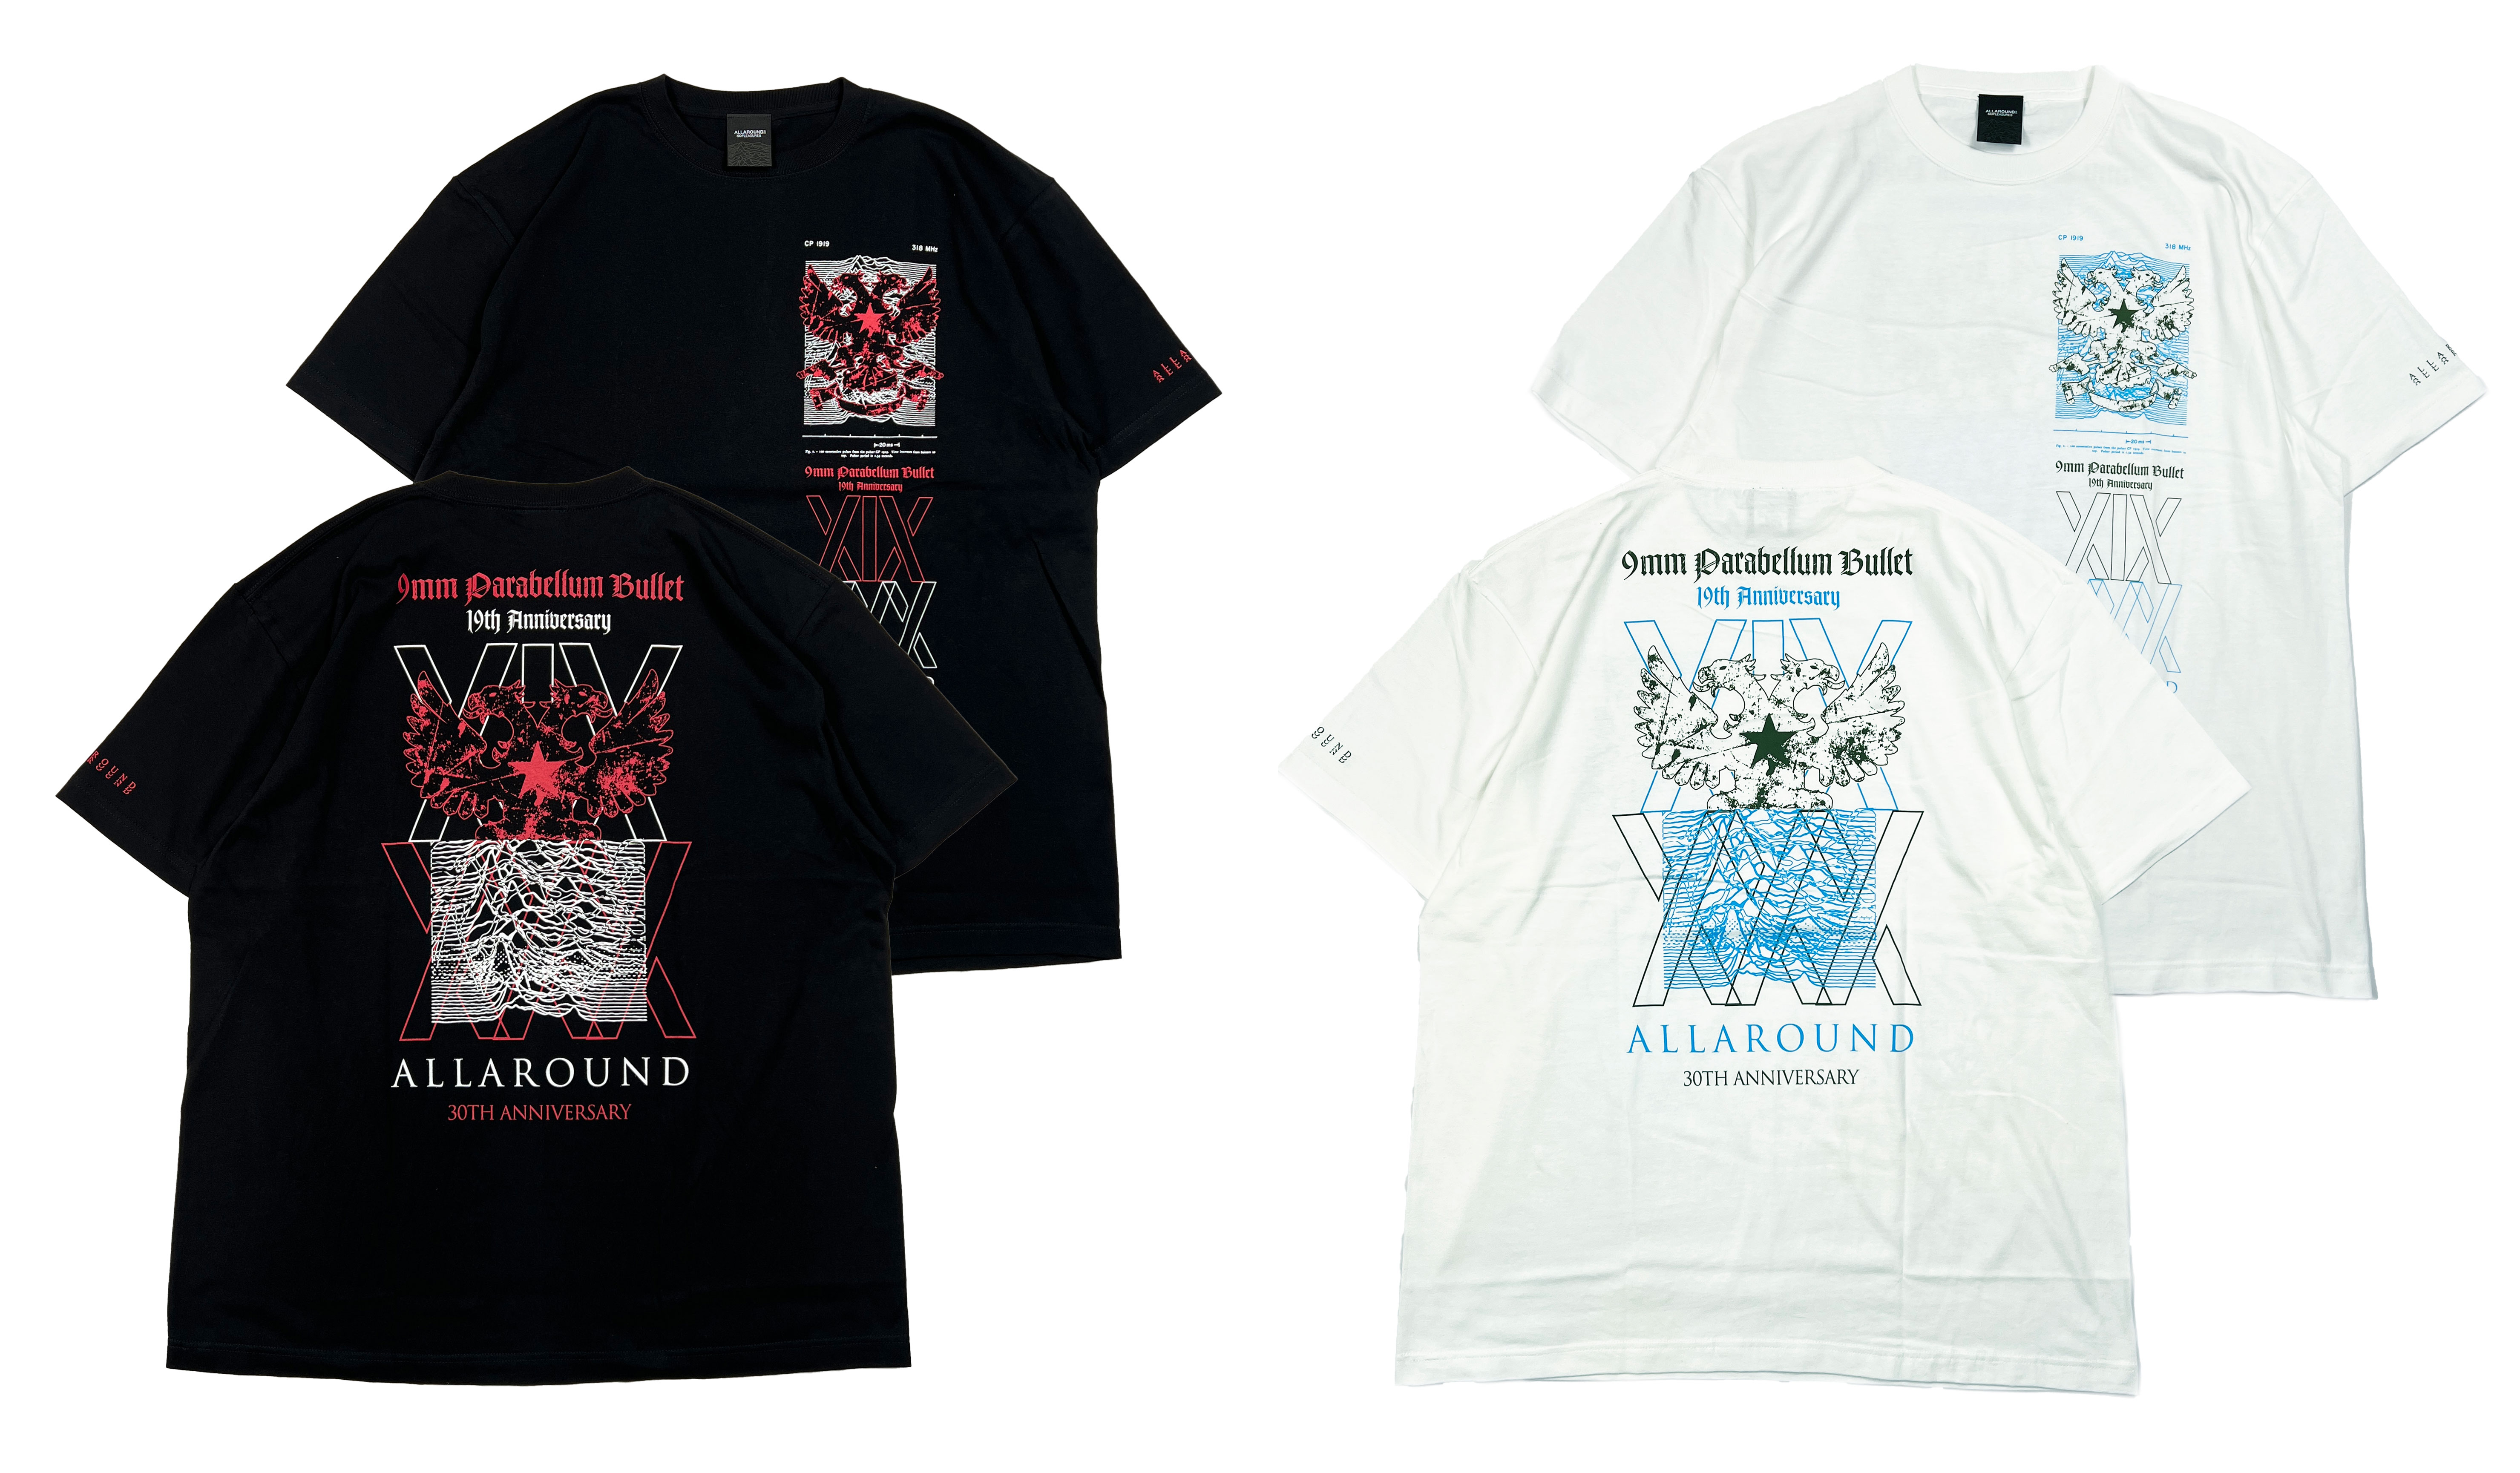 Dragon Ash　face to face　Tシャツ　レア　初期　美品　①緑